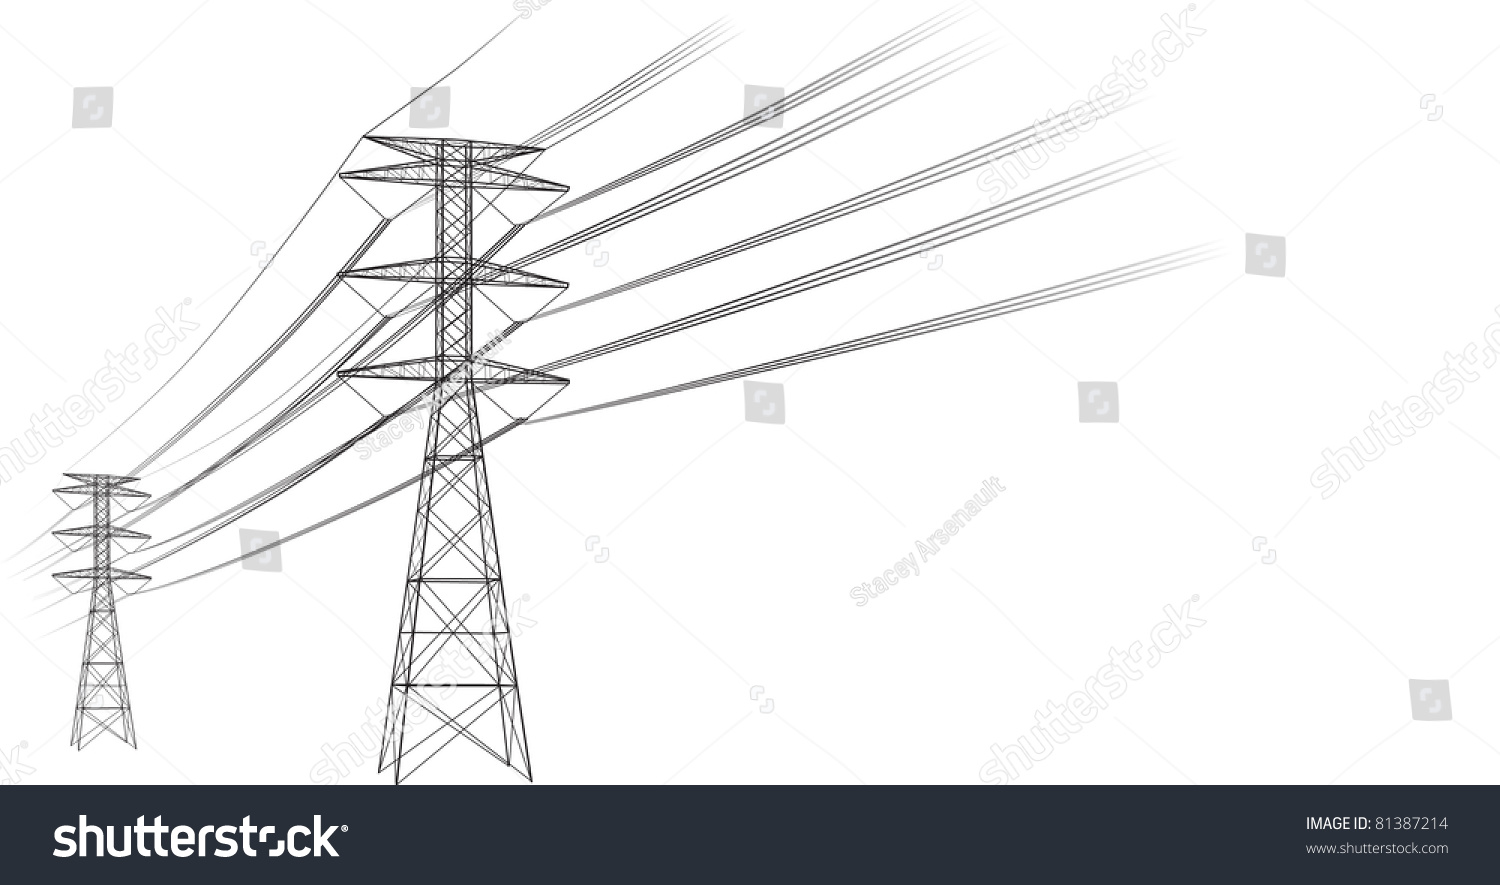 clipart of power lines - photo #49